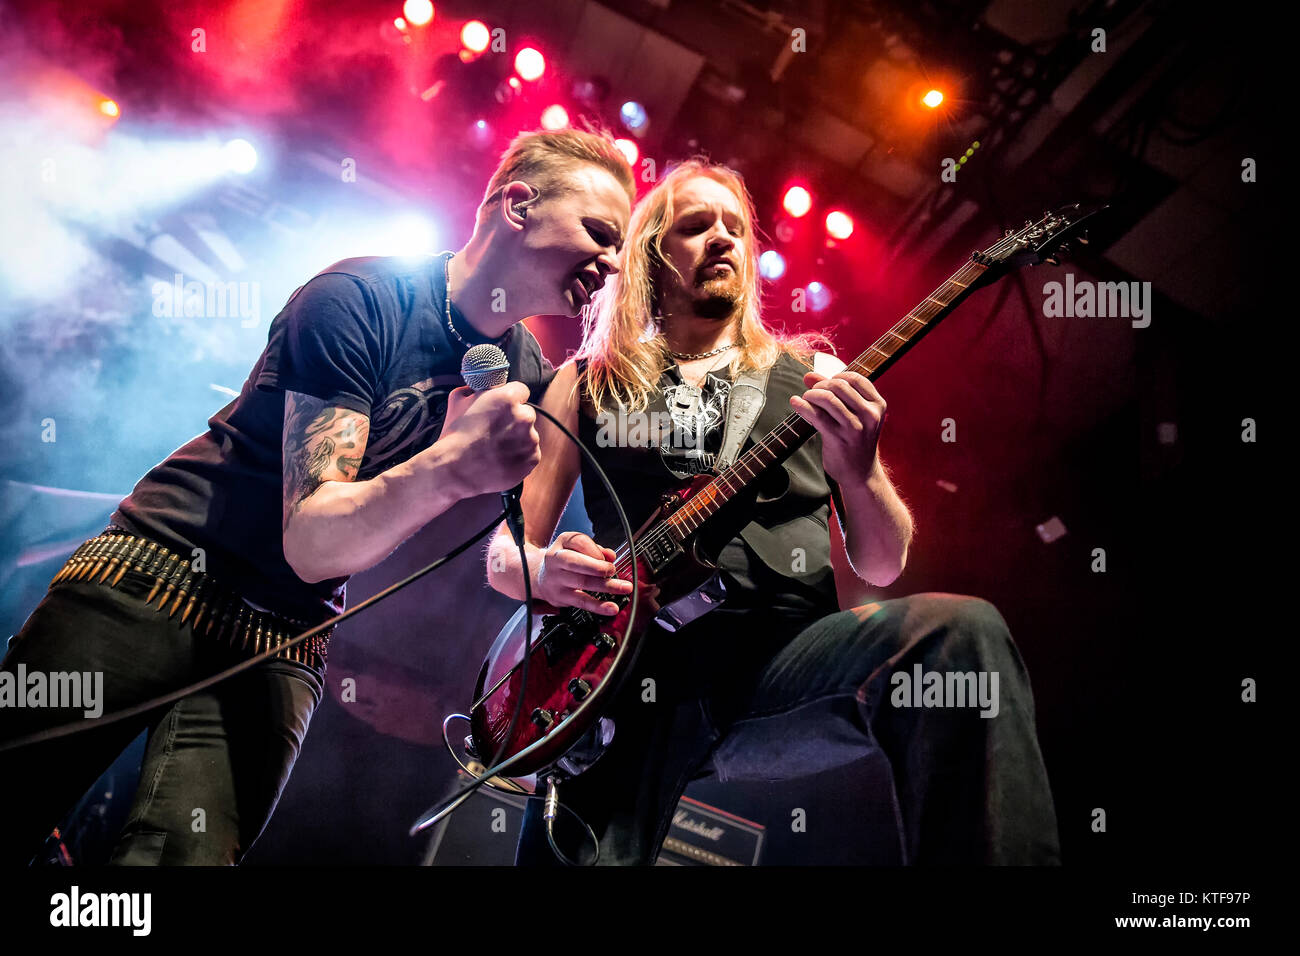 The Swedish hard rock Eclipse performs a live concert at Rockefeller in Oslo. Here vocalist Erik Mårtensson is seen live on stage with guitarist Magnus Henriksson. Norway, 31/01 2014. Stock Photo